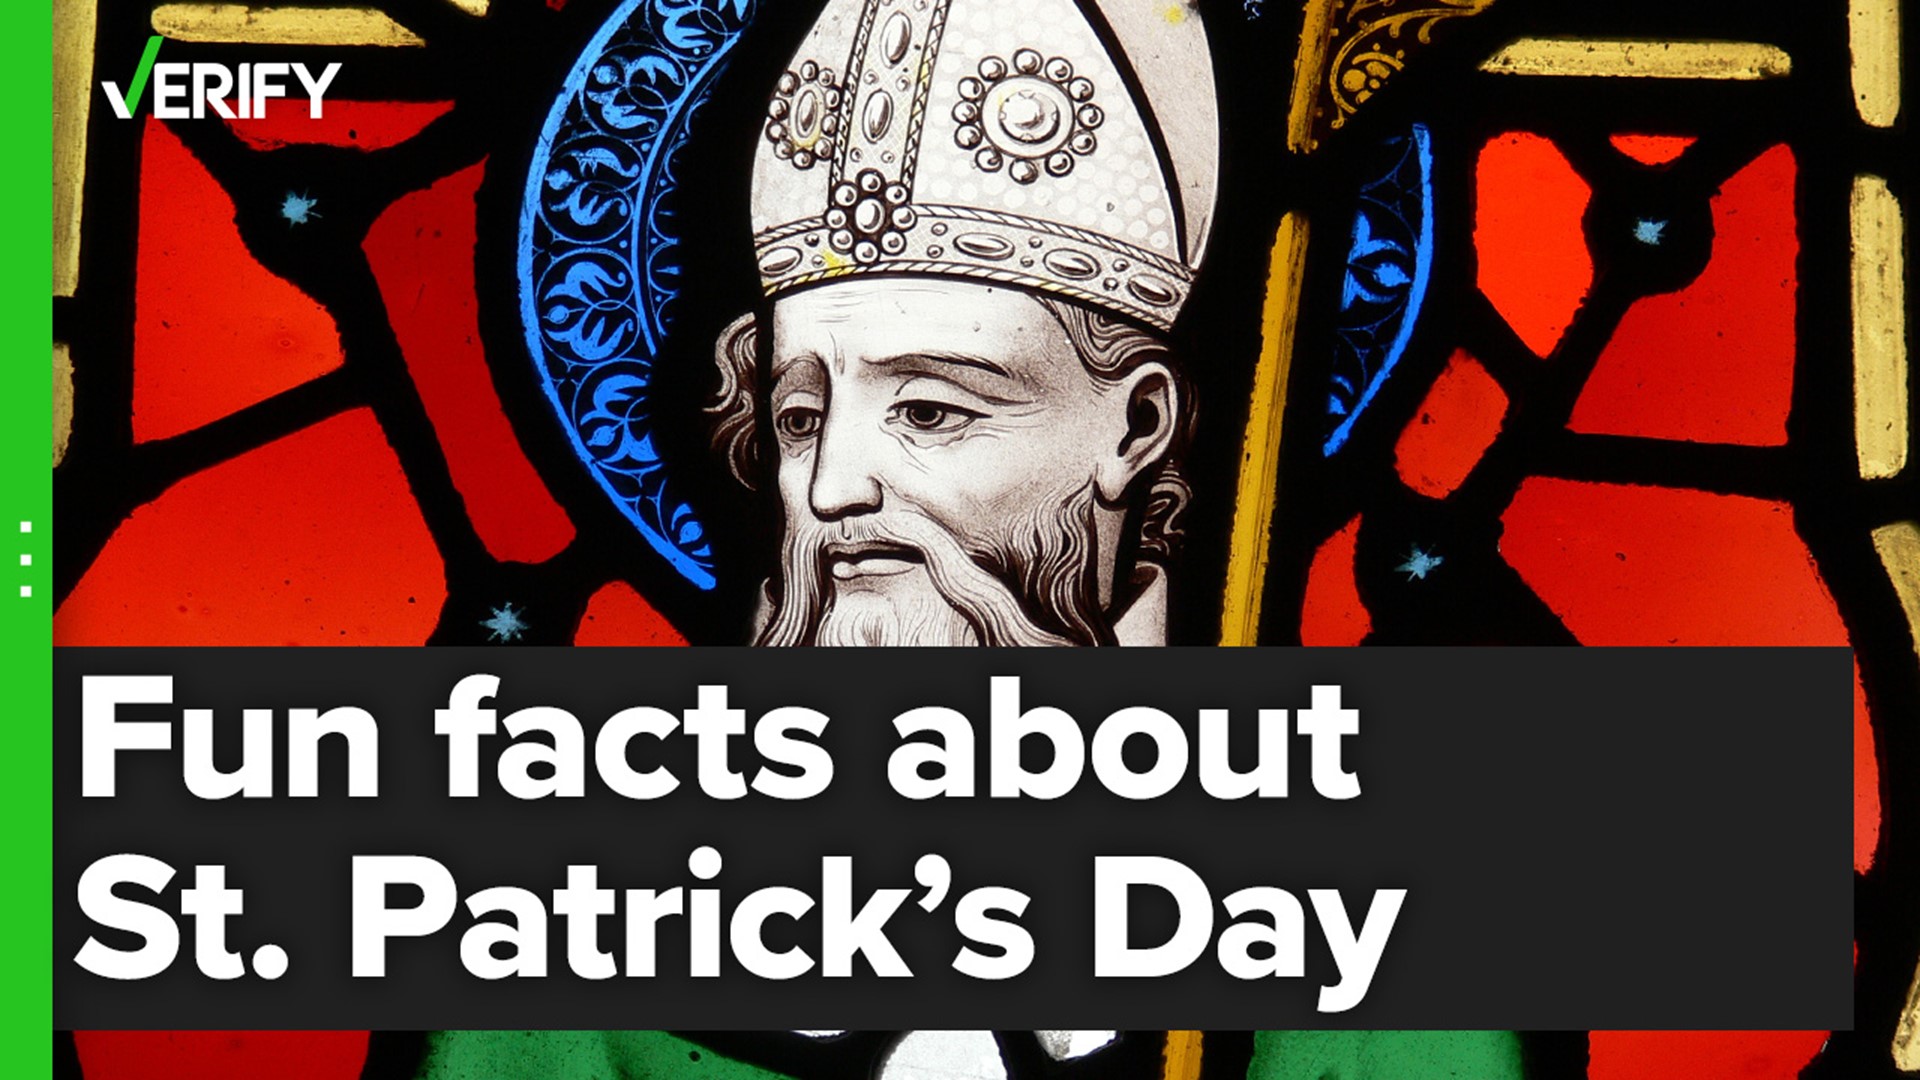 Blue, not green, was the first color associated with St. Patrick’s Day — and Saint Patrick, the patron saint of Ireland, was not originally from the country.